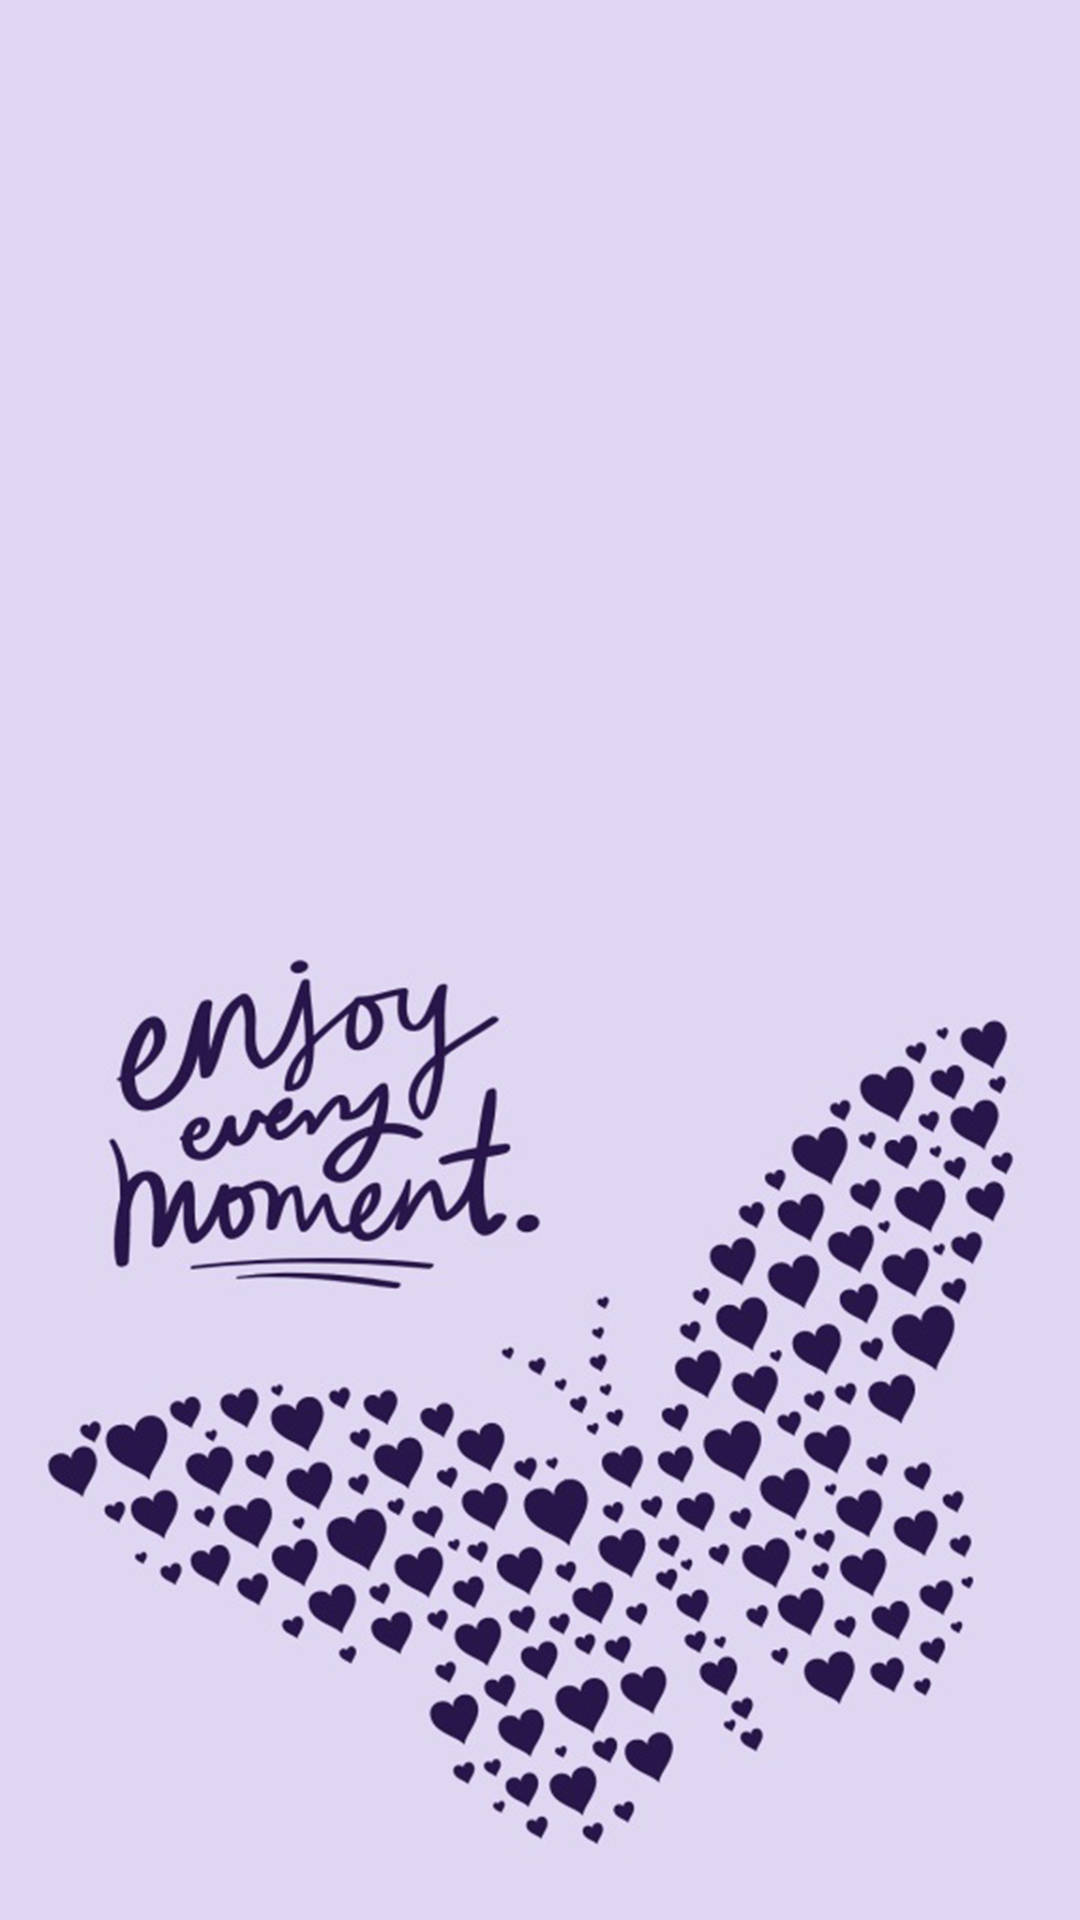 Download Instagram Story Enjoy Every Moment Wallpaper 